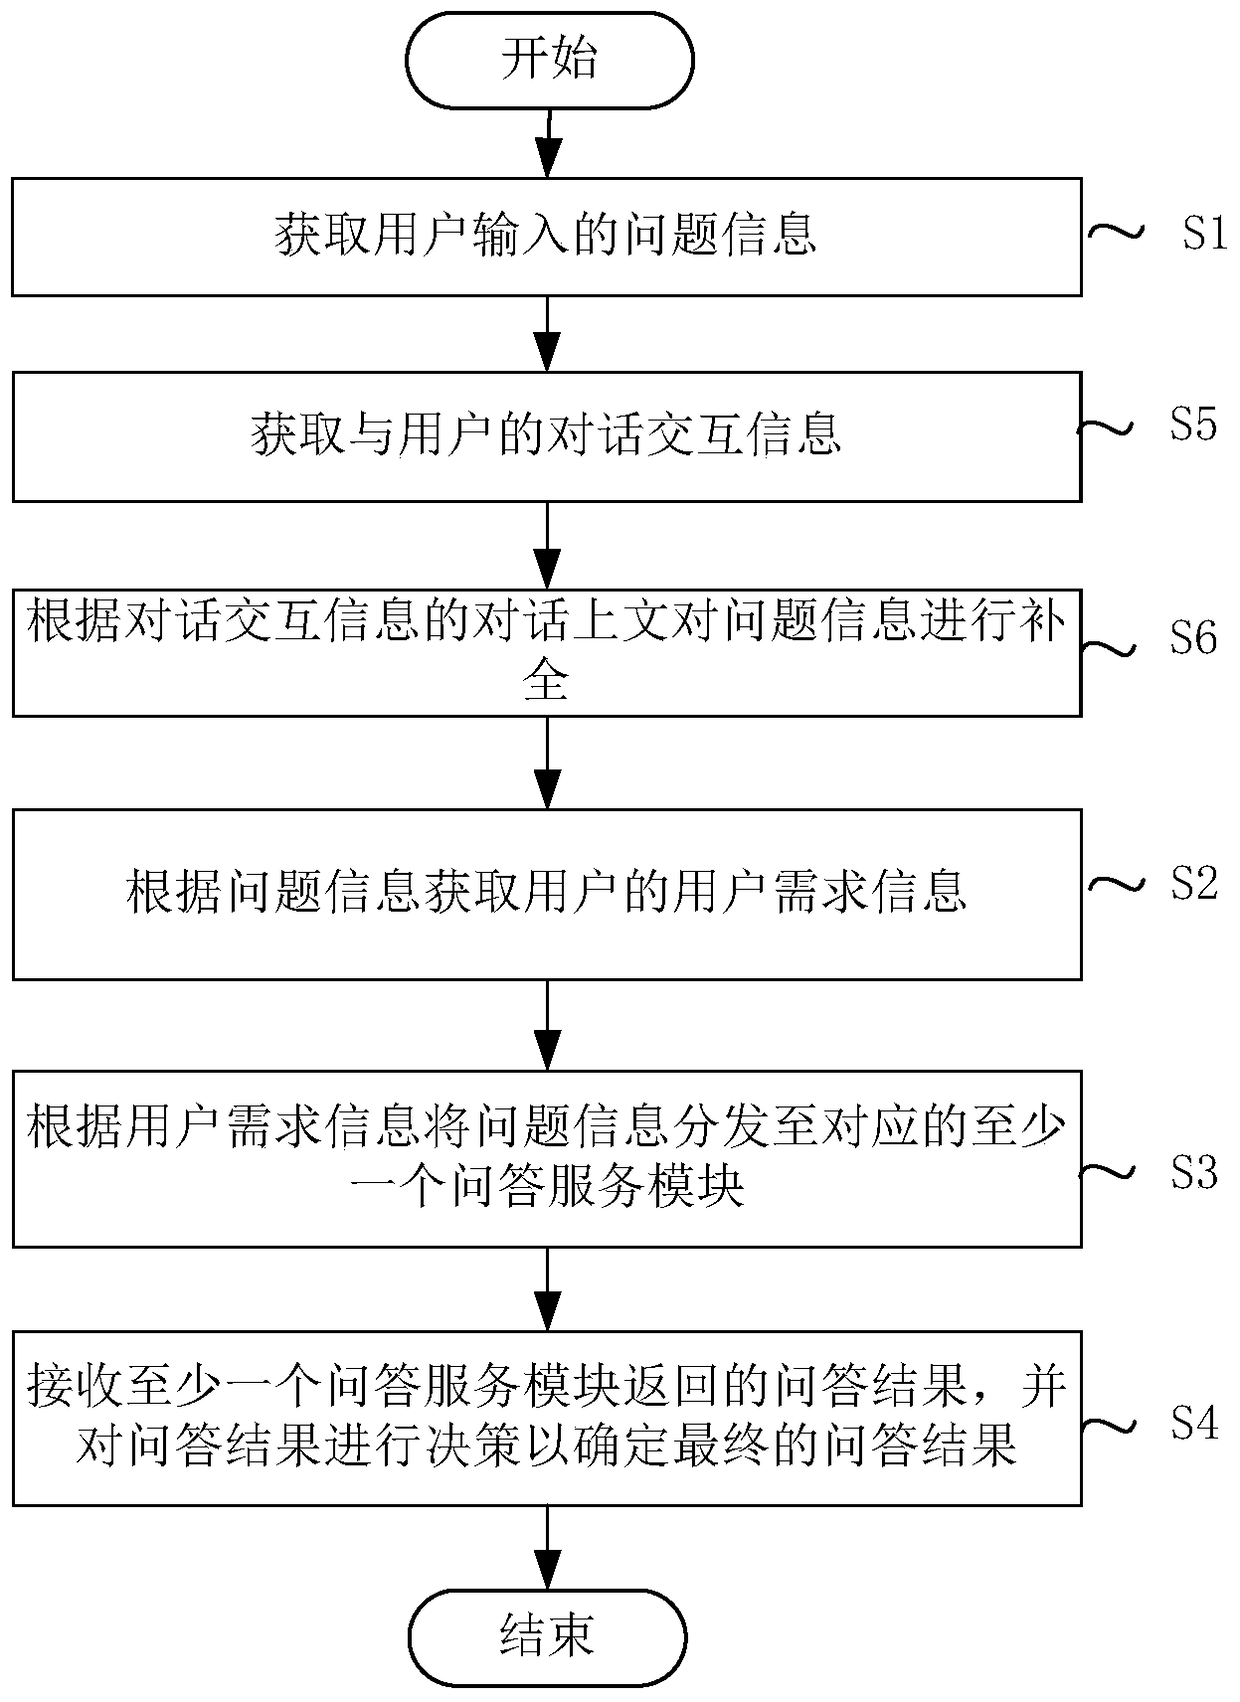 Method and device for providing in-depth question answering service based on artificial intelligence